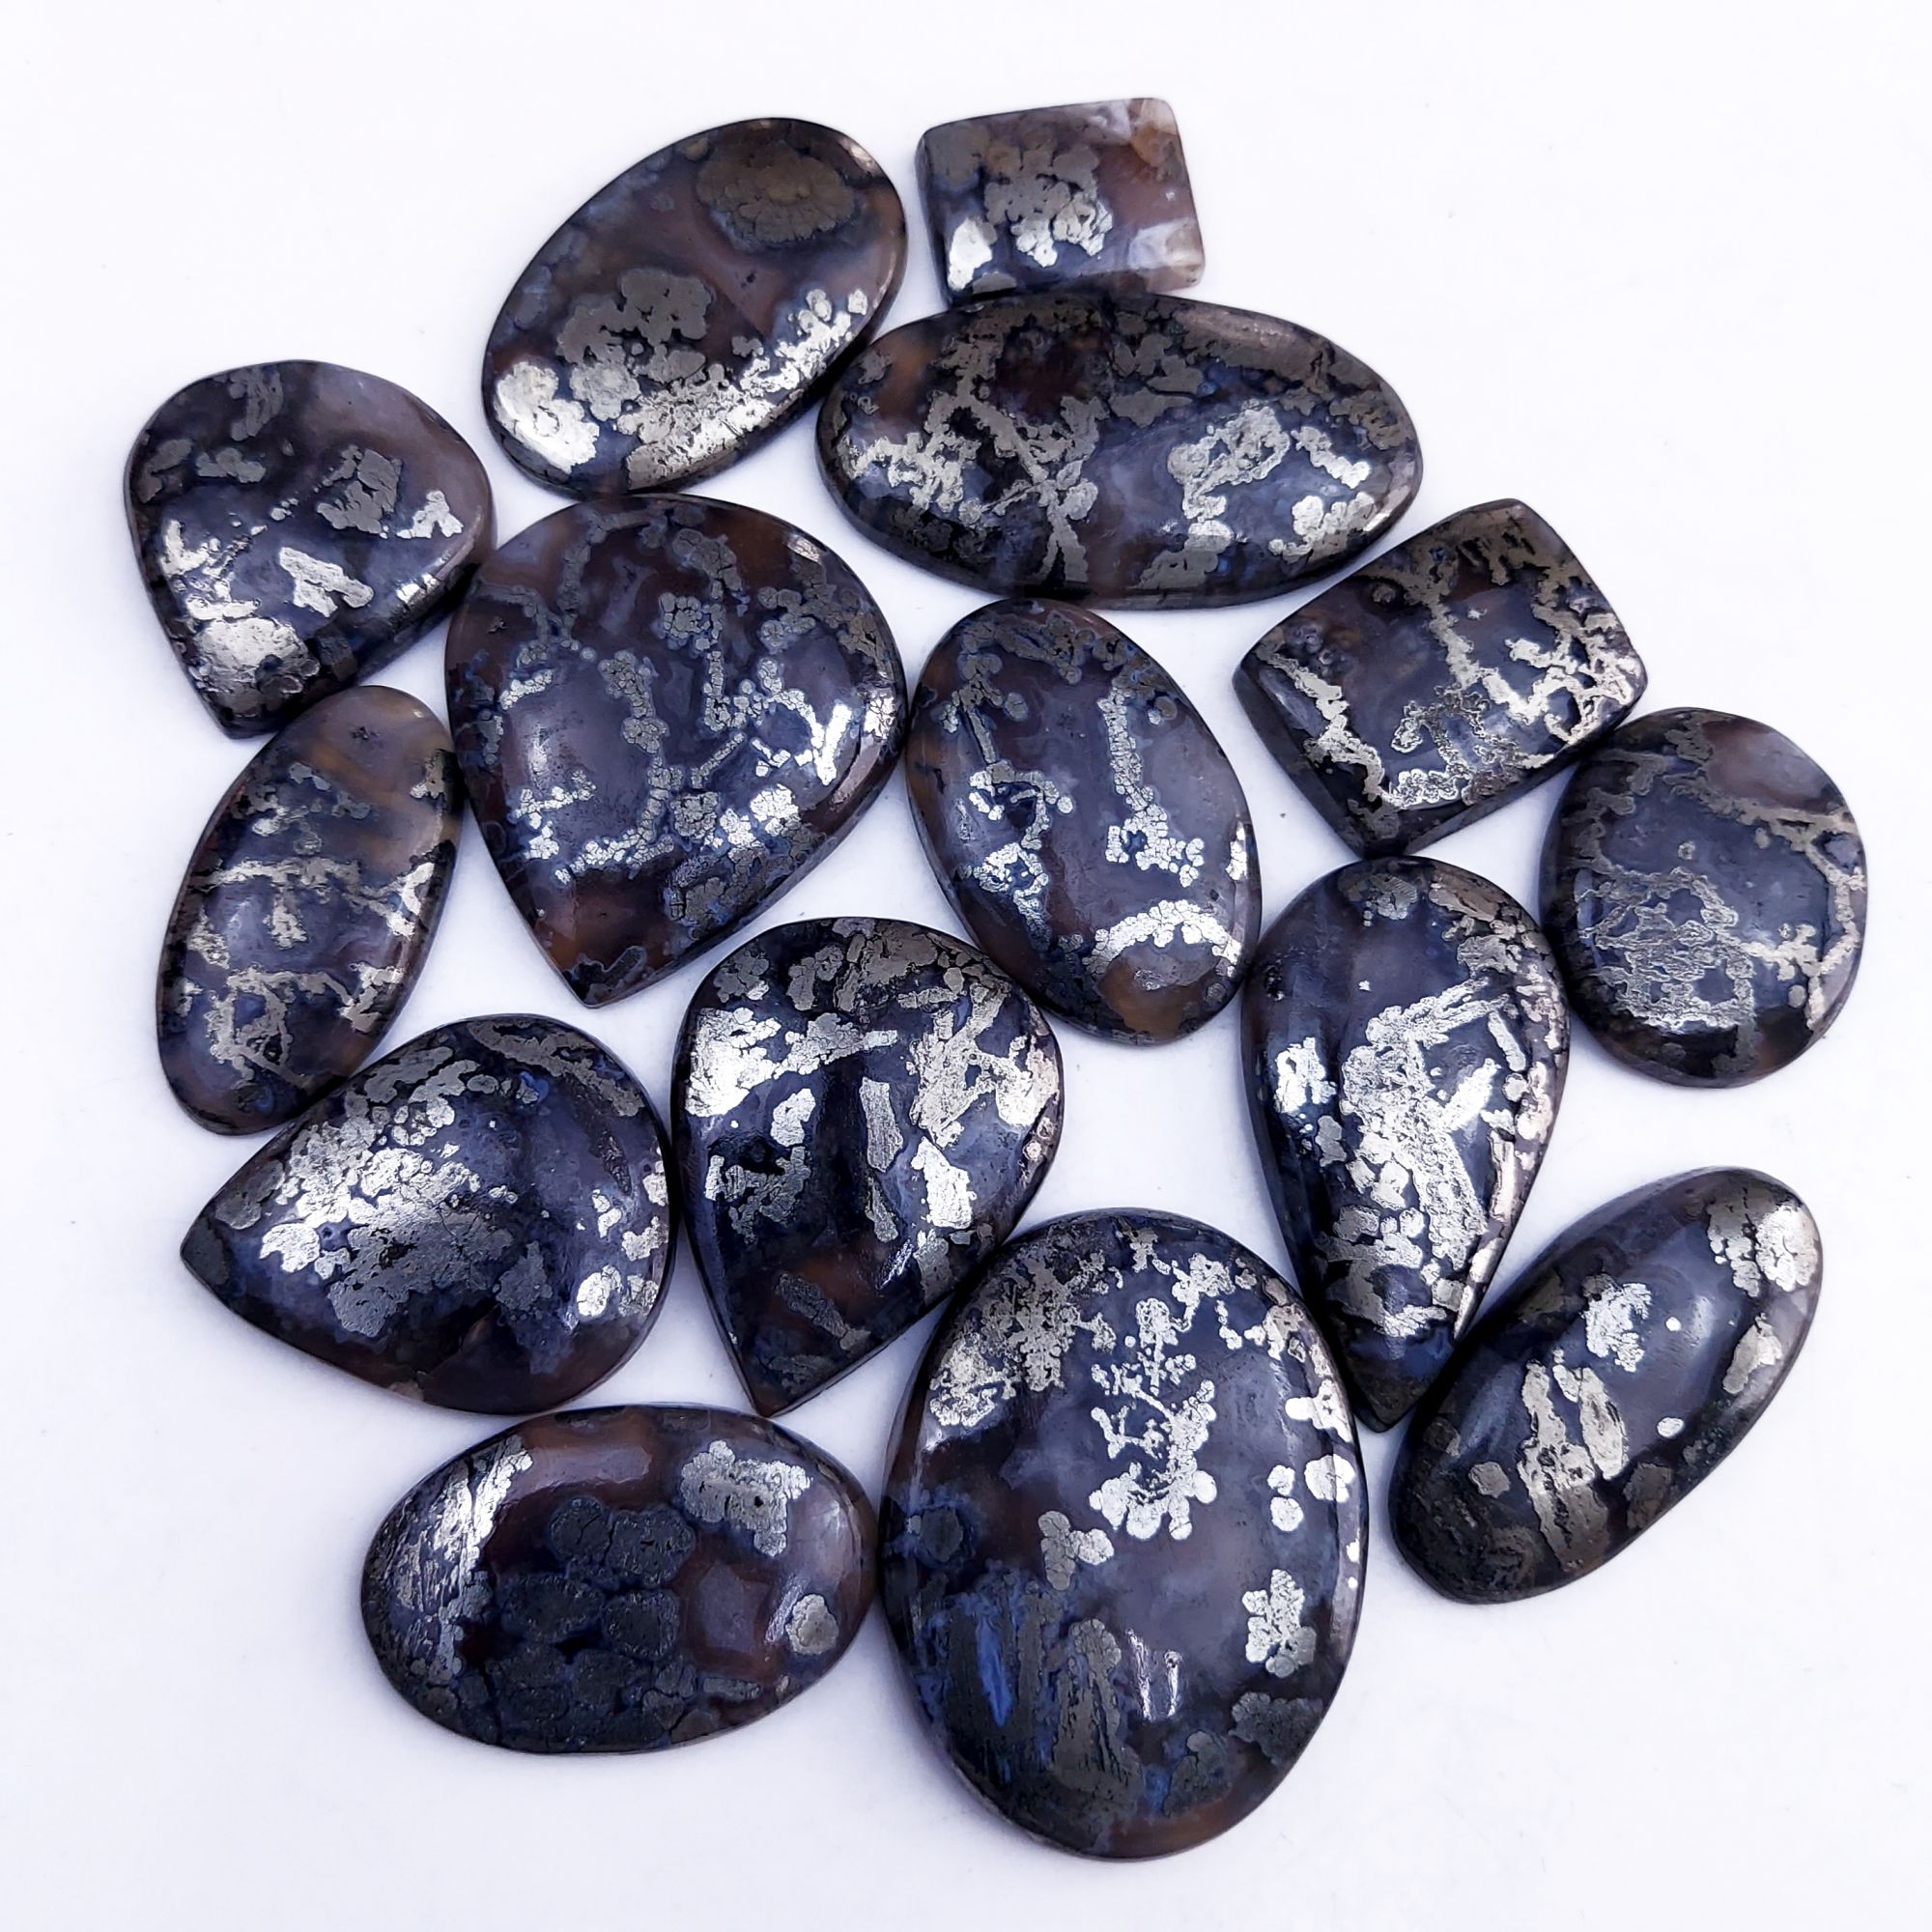 15Pcs 714Cts Natural Marcasite Grey Cabochon Back Side Unpolished Gemstone Semi-Precious Gemstones For Jewelry Making 44x24 20x15mm #10044